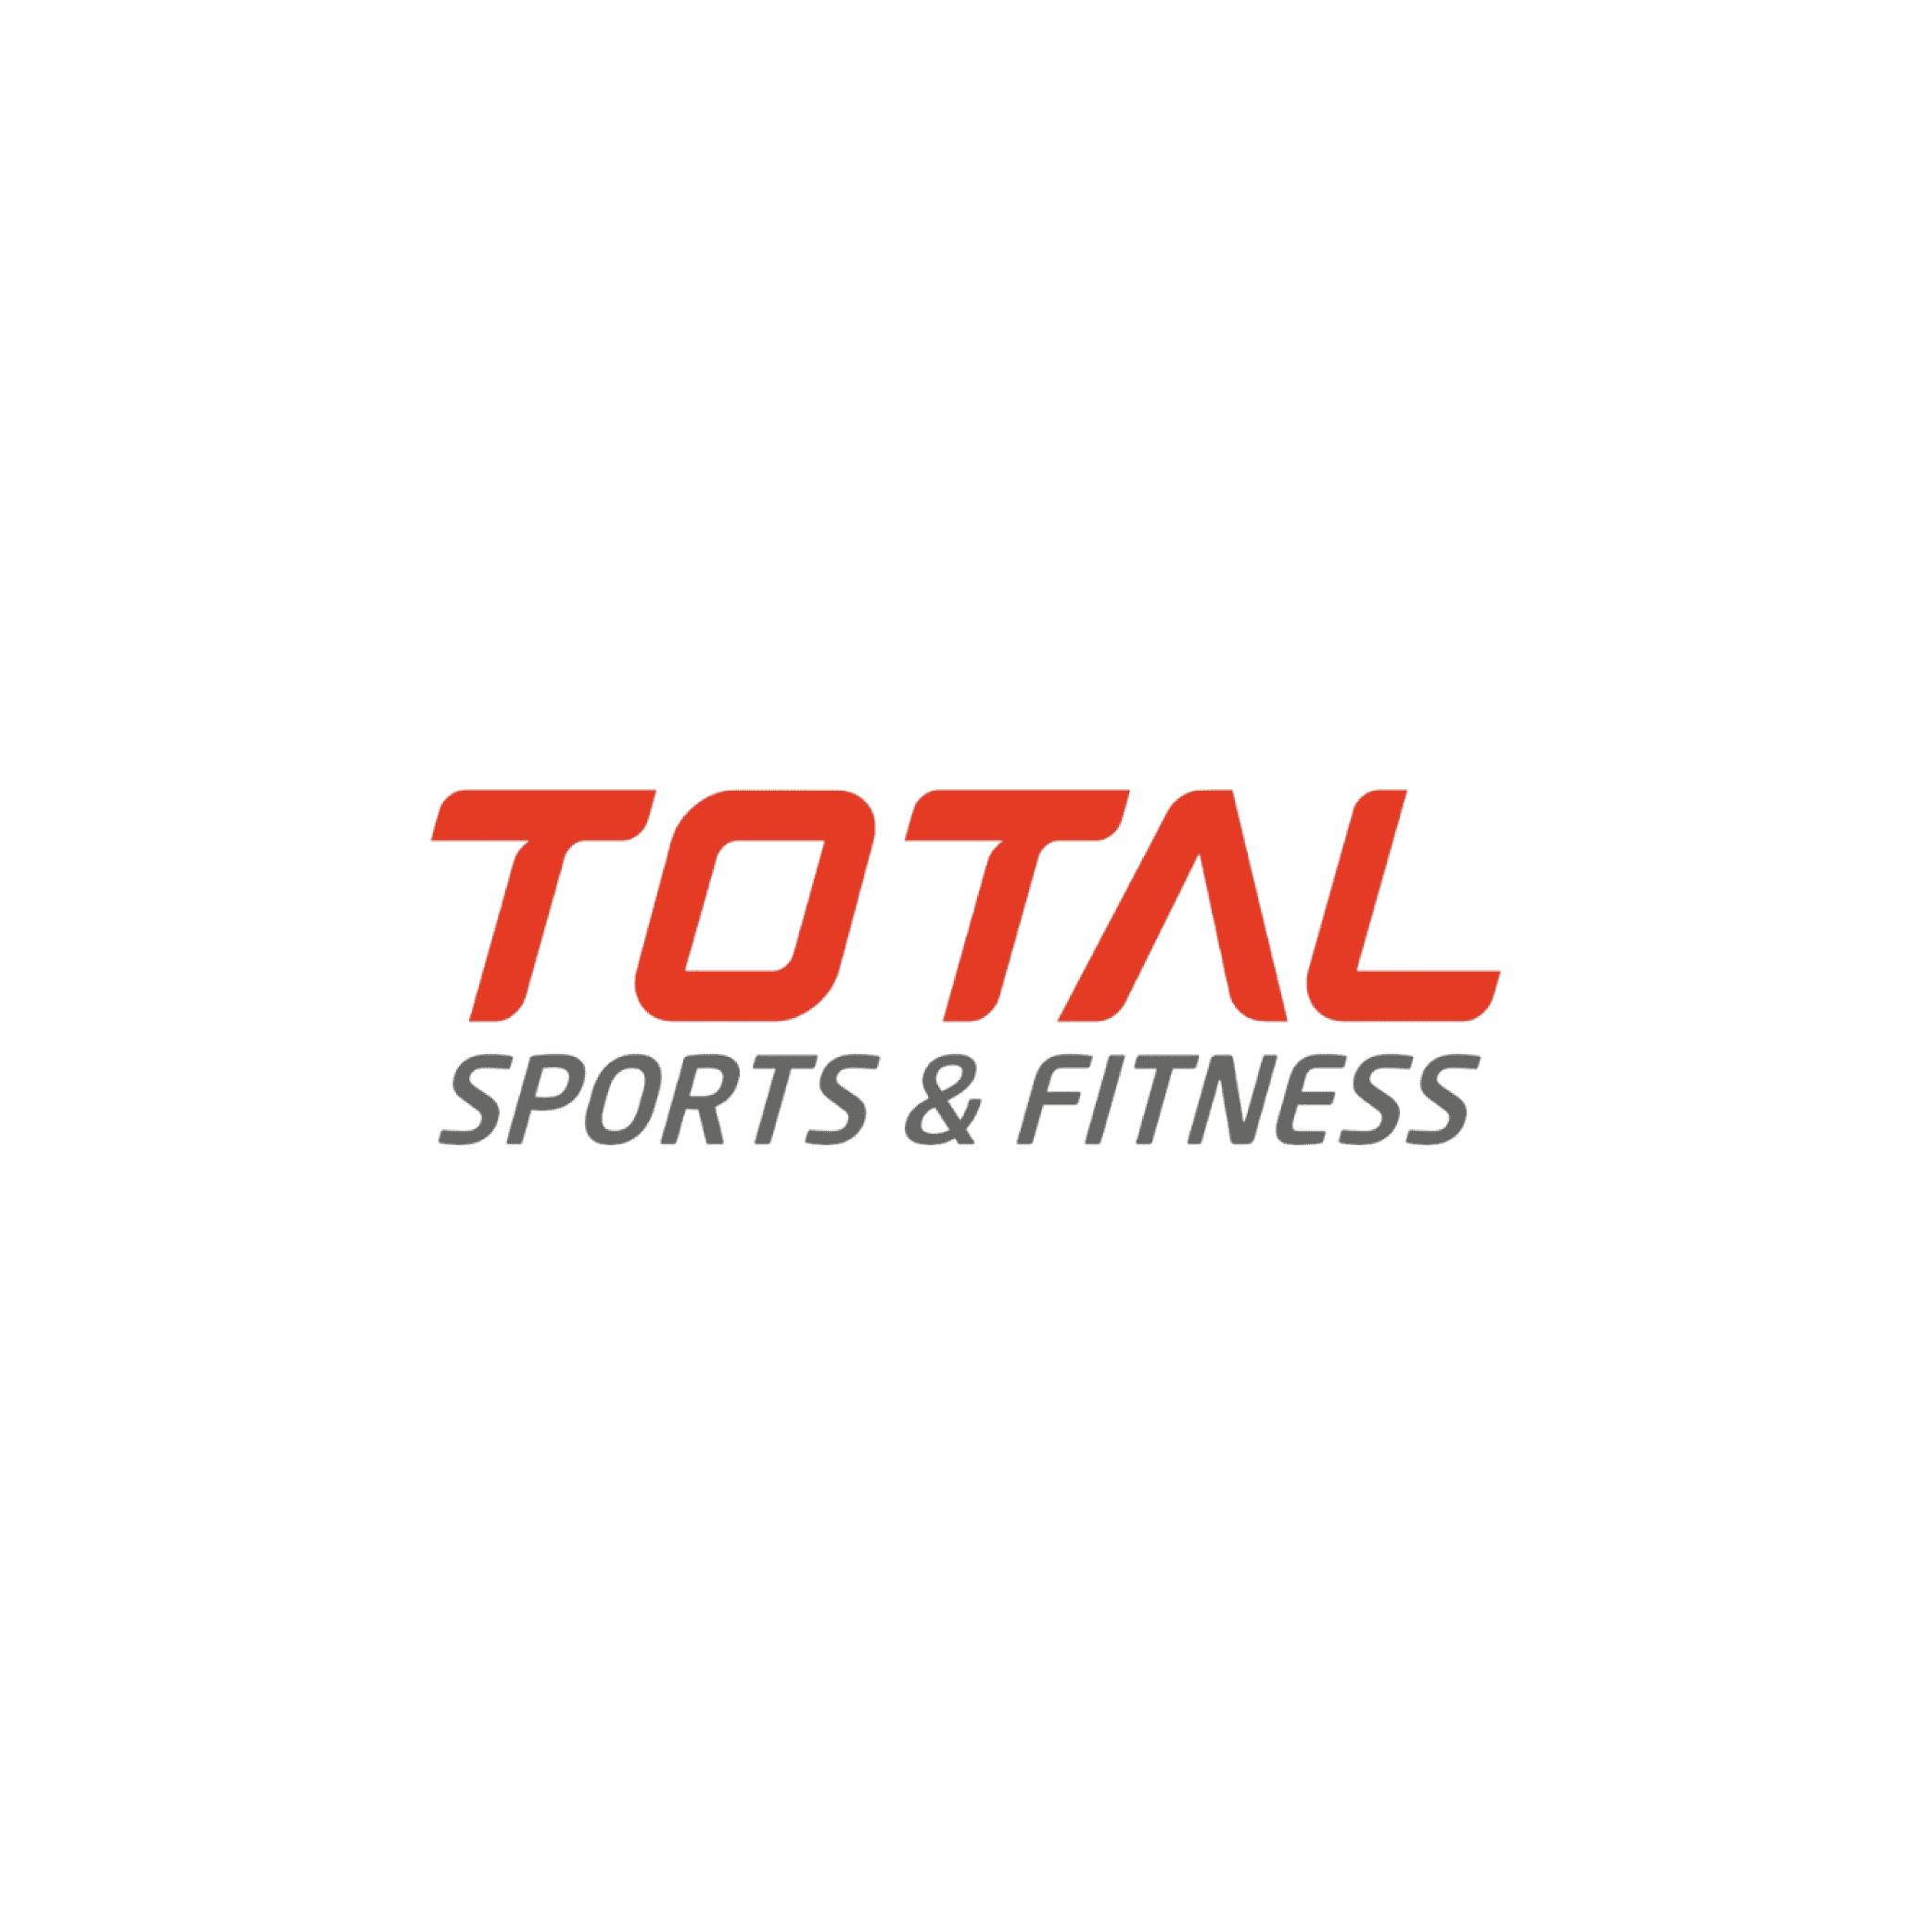 total sports logo business consultancy